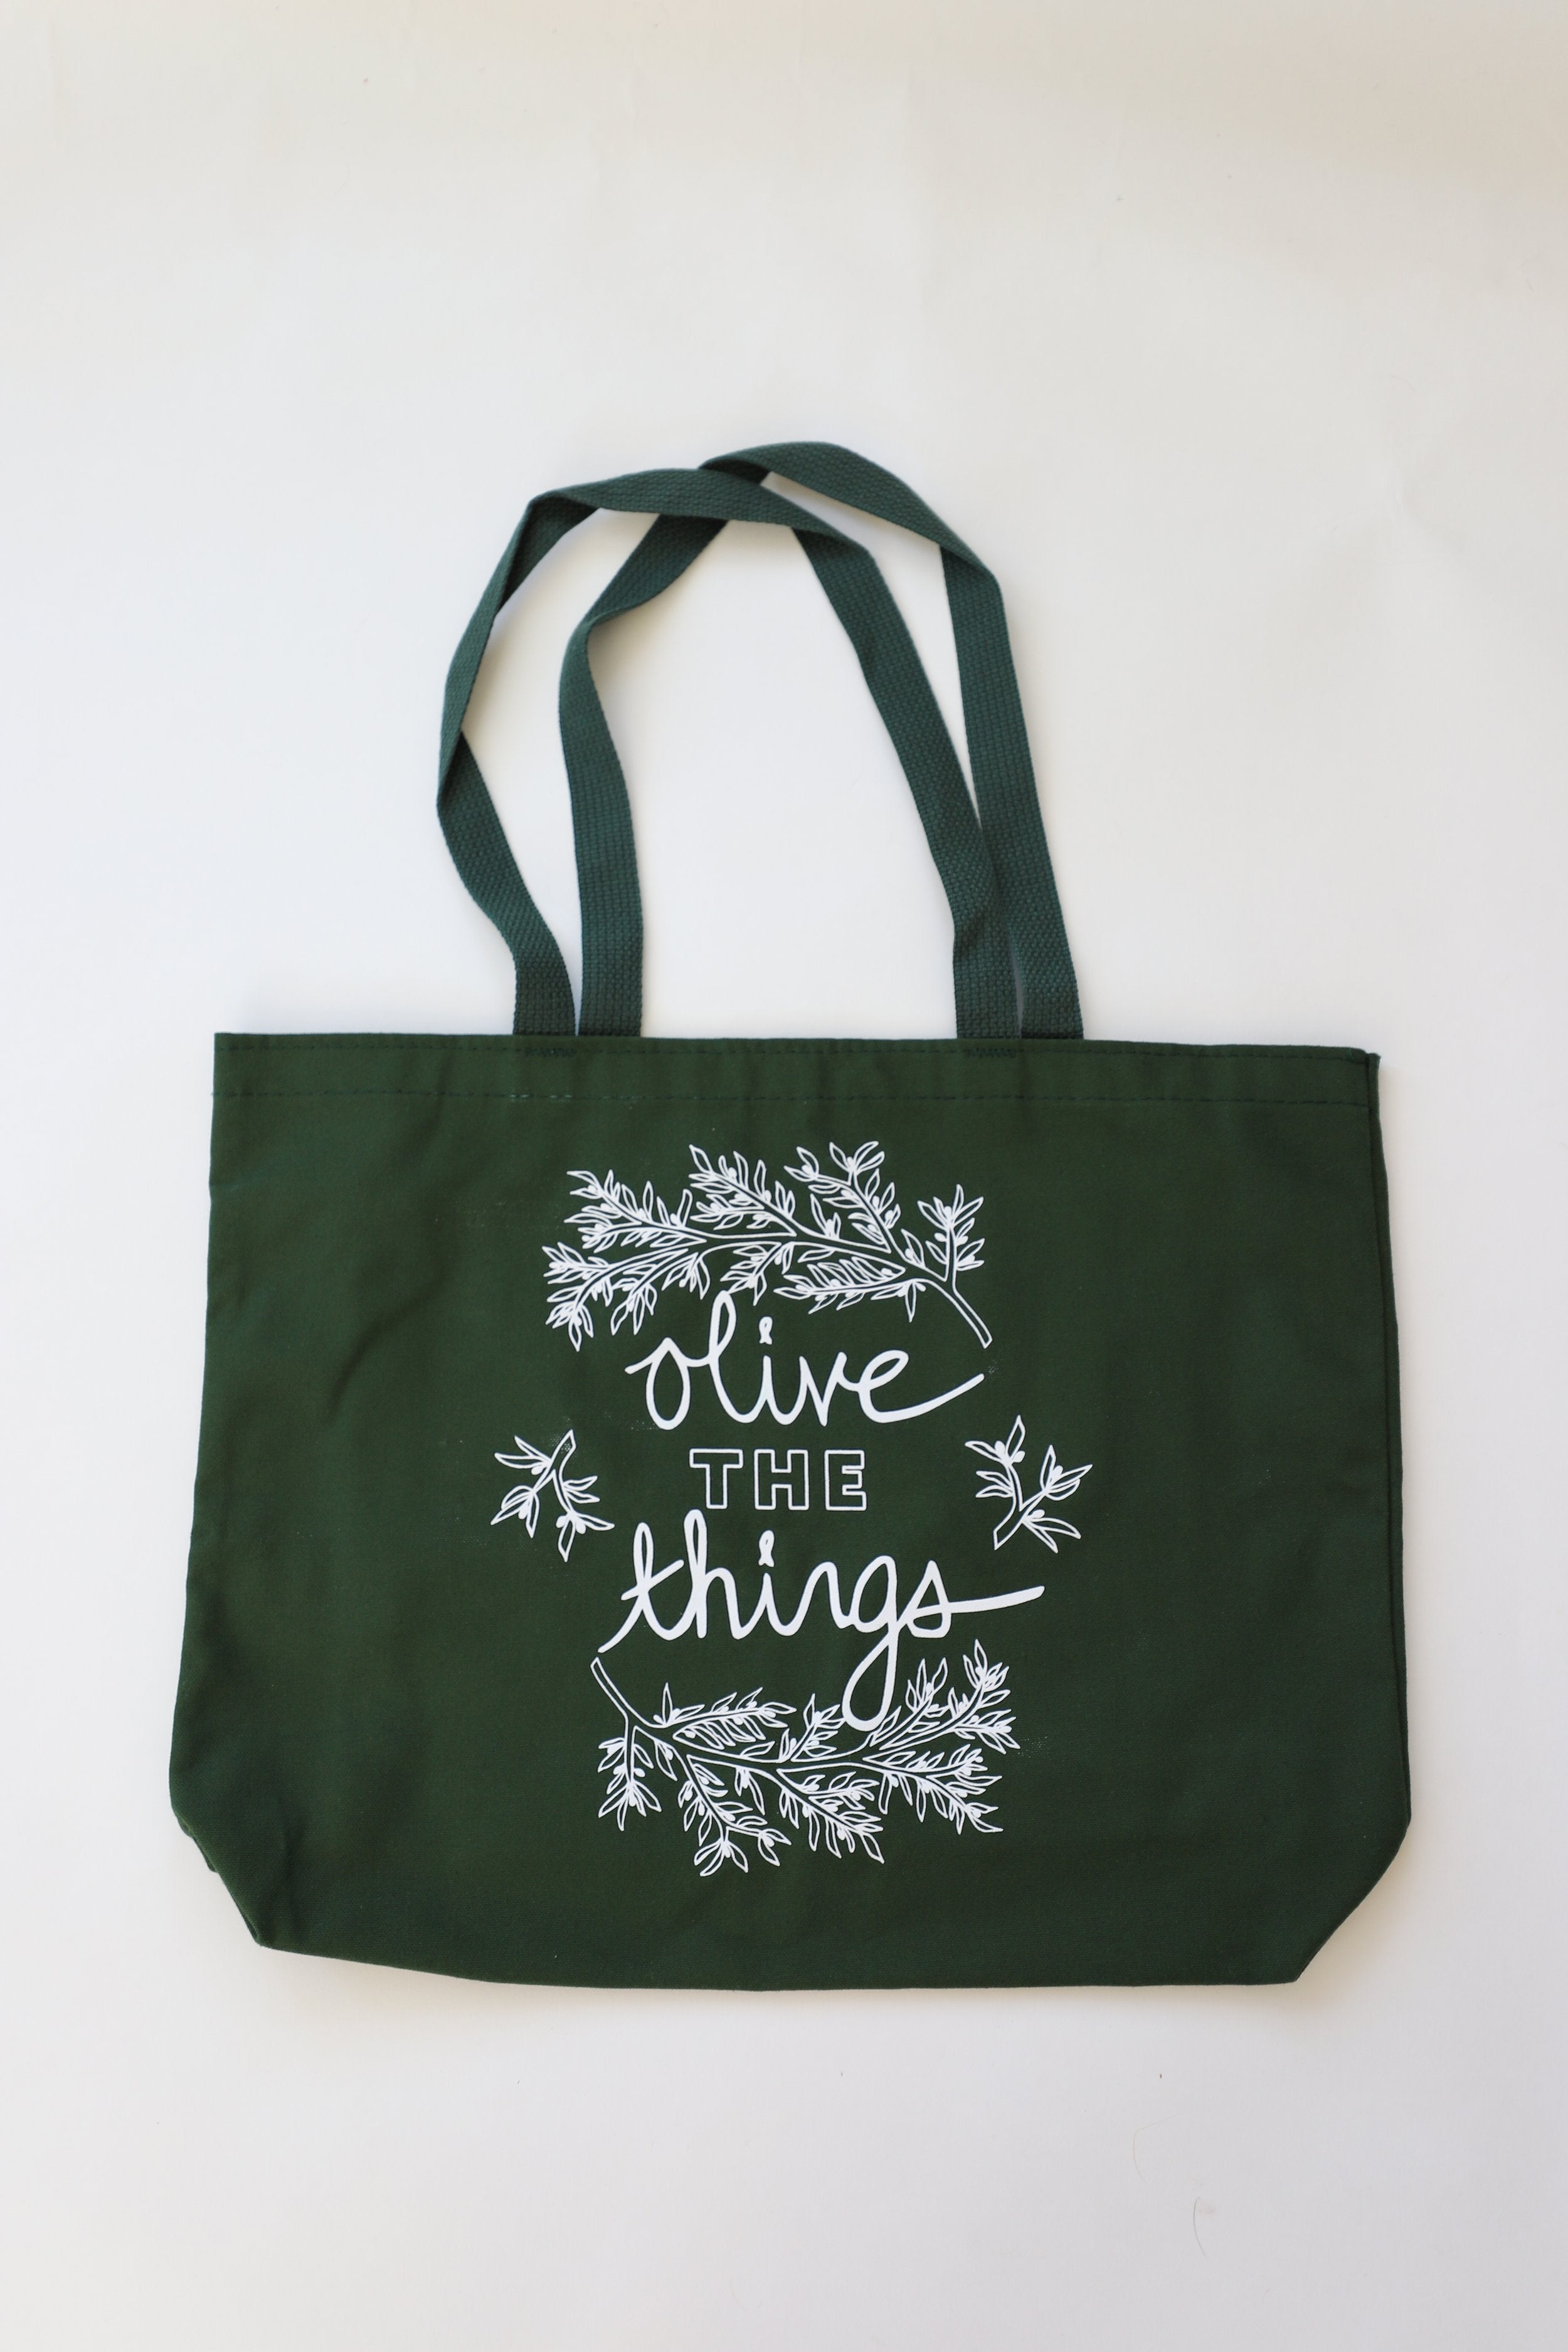 Those Eyes Embroidered Tote Bag – New West